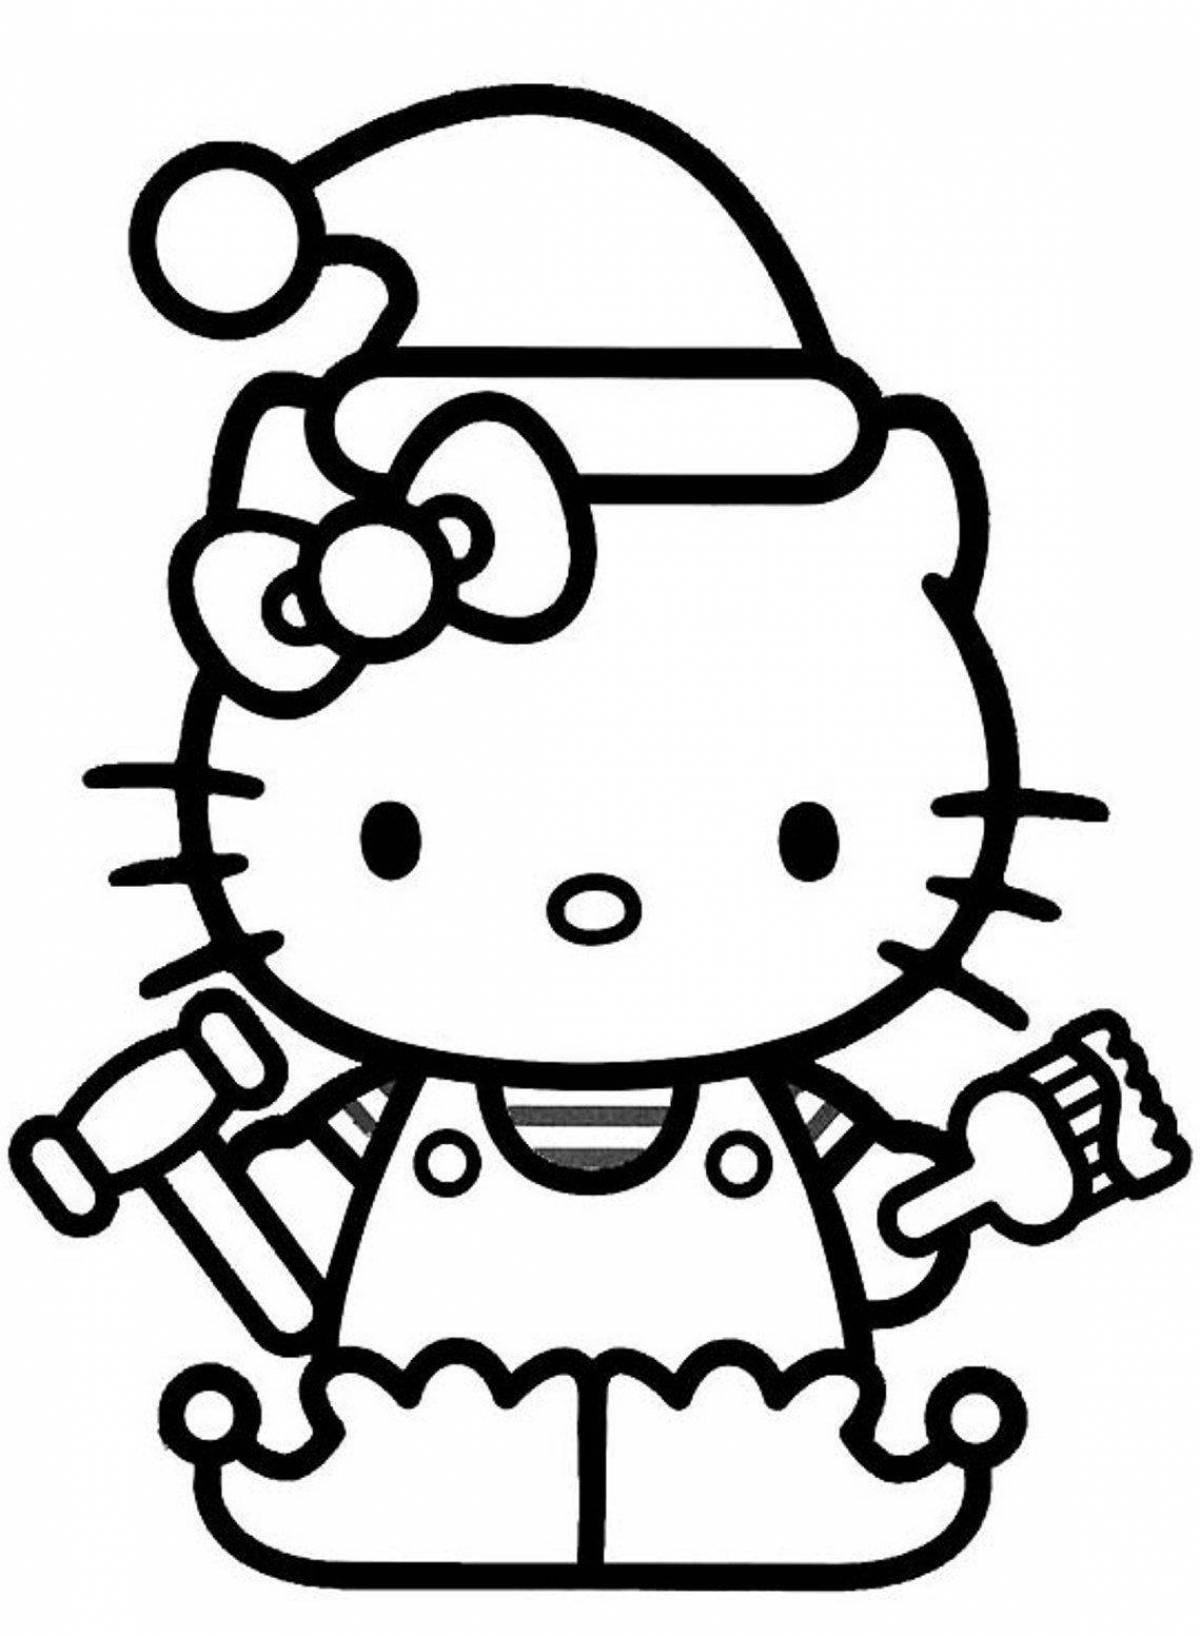 Colorful hello kitty bunny coloring book